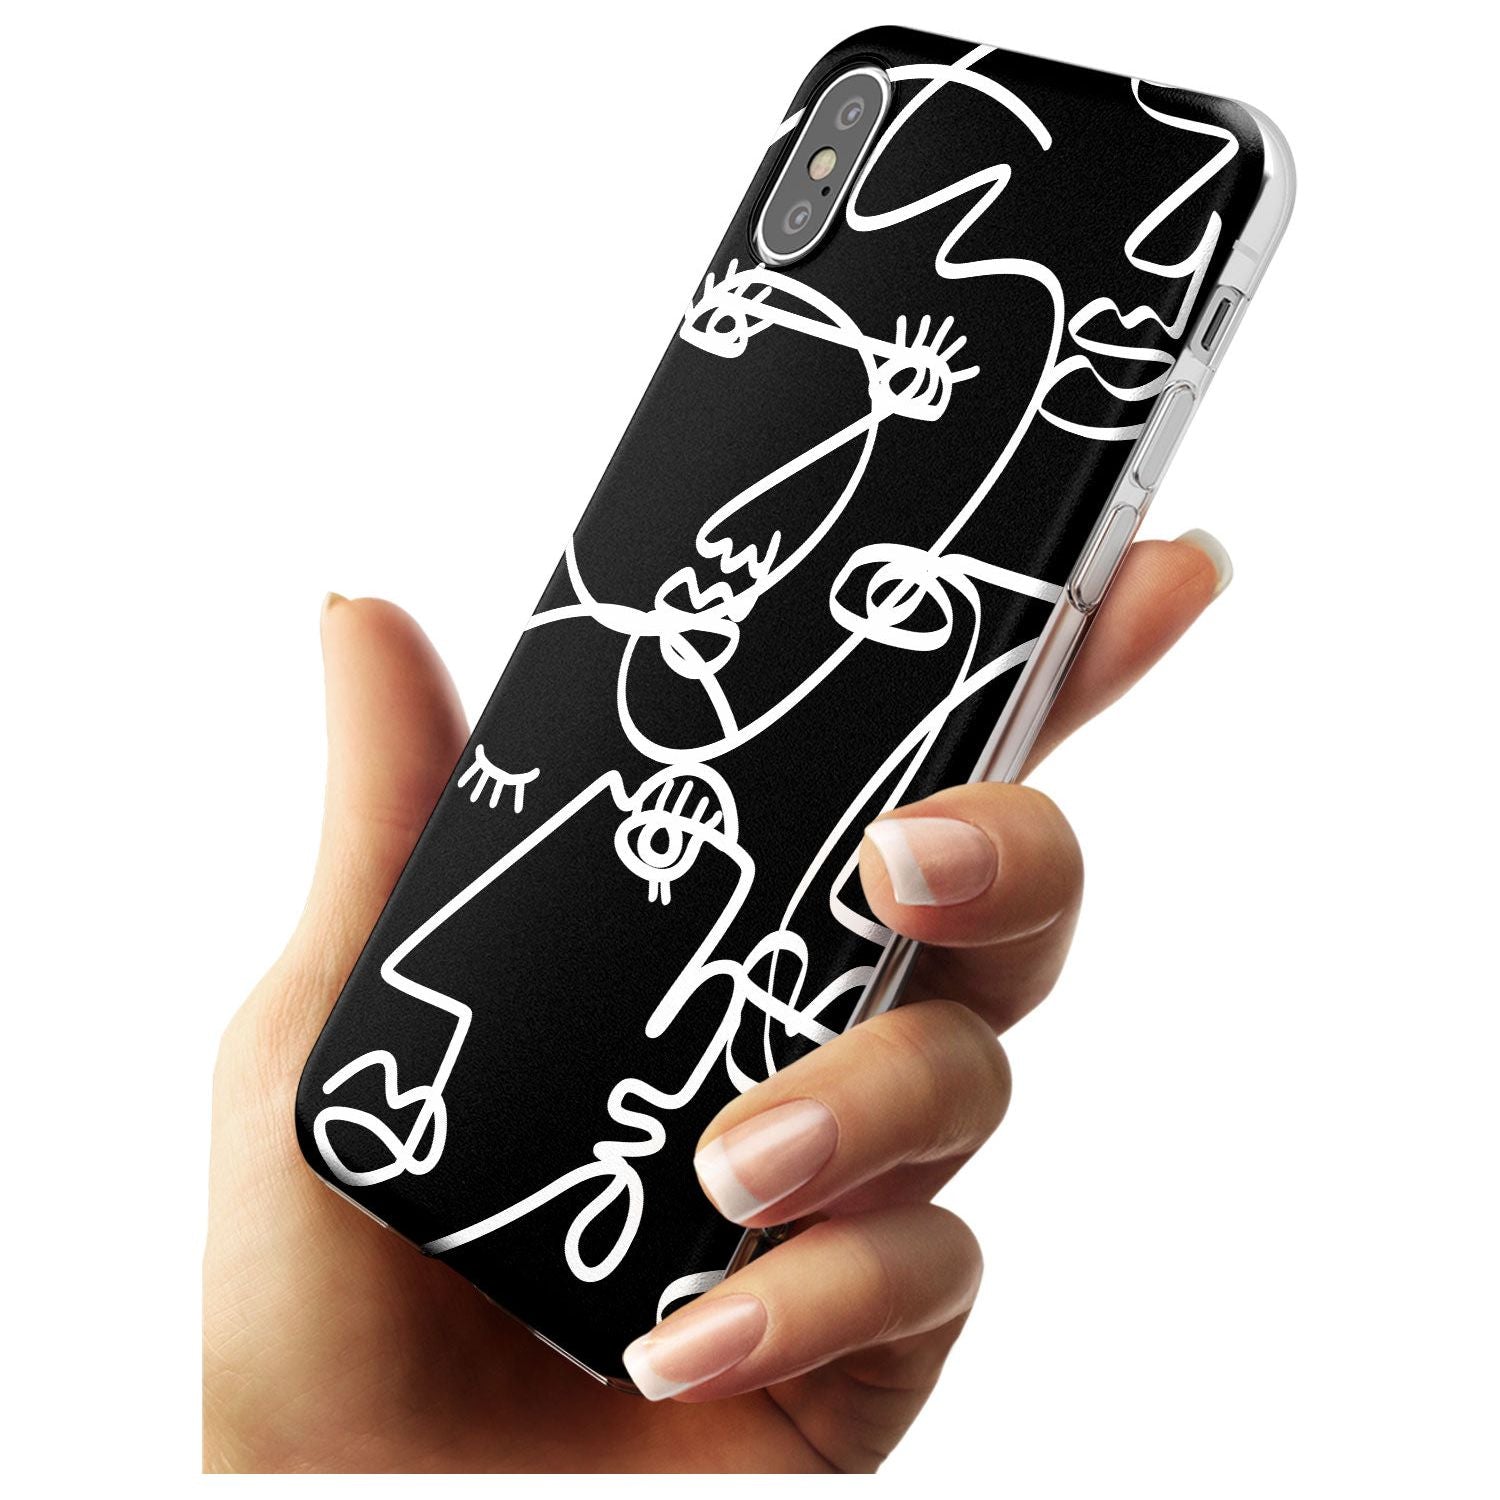 Continuous Line Faces: White on Black Black Impact Phone Case for iPhone X XS Max XR